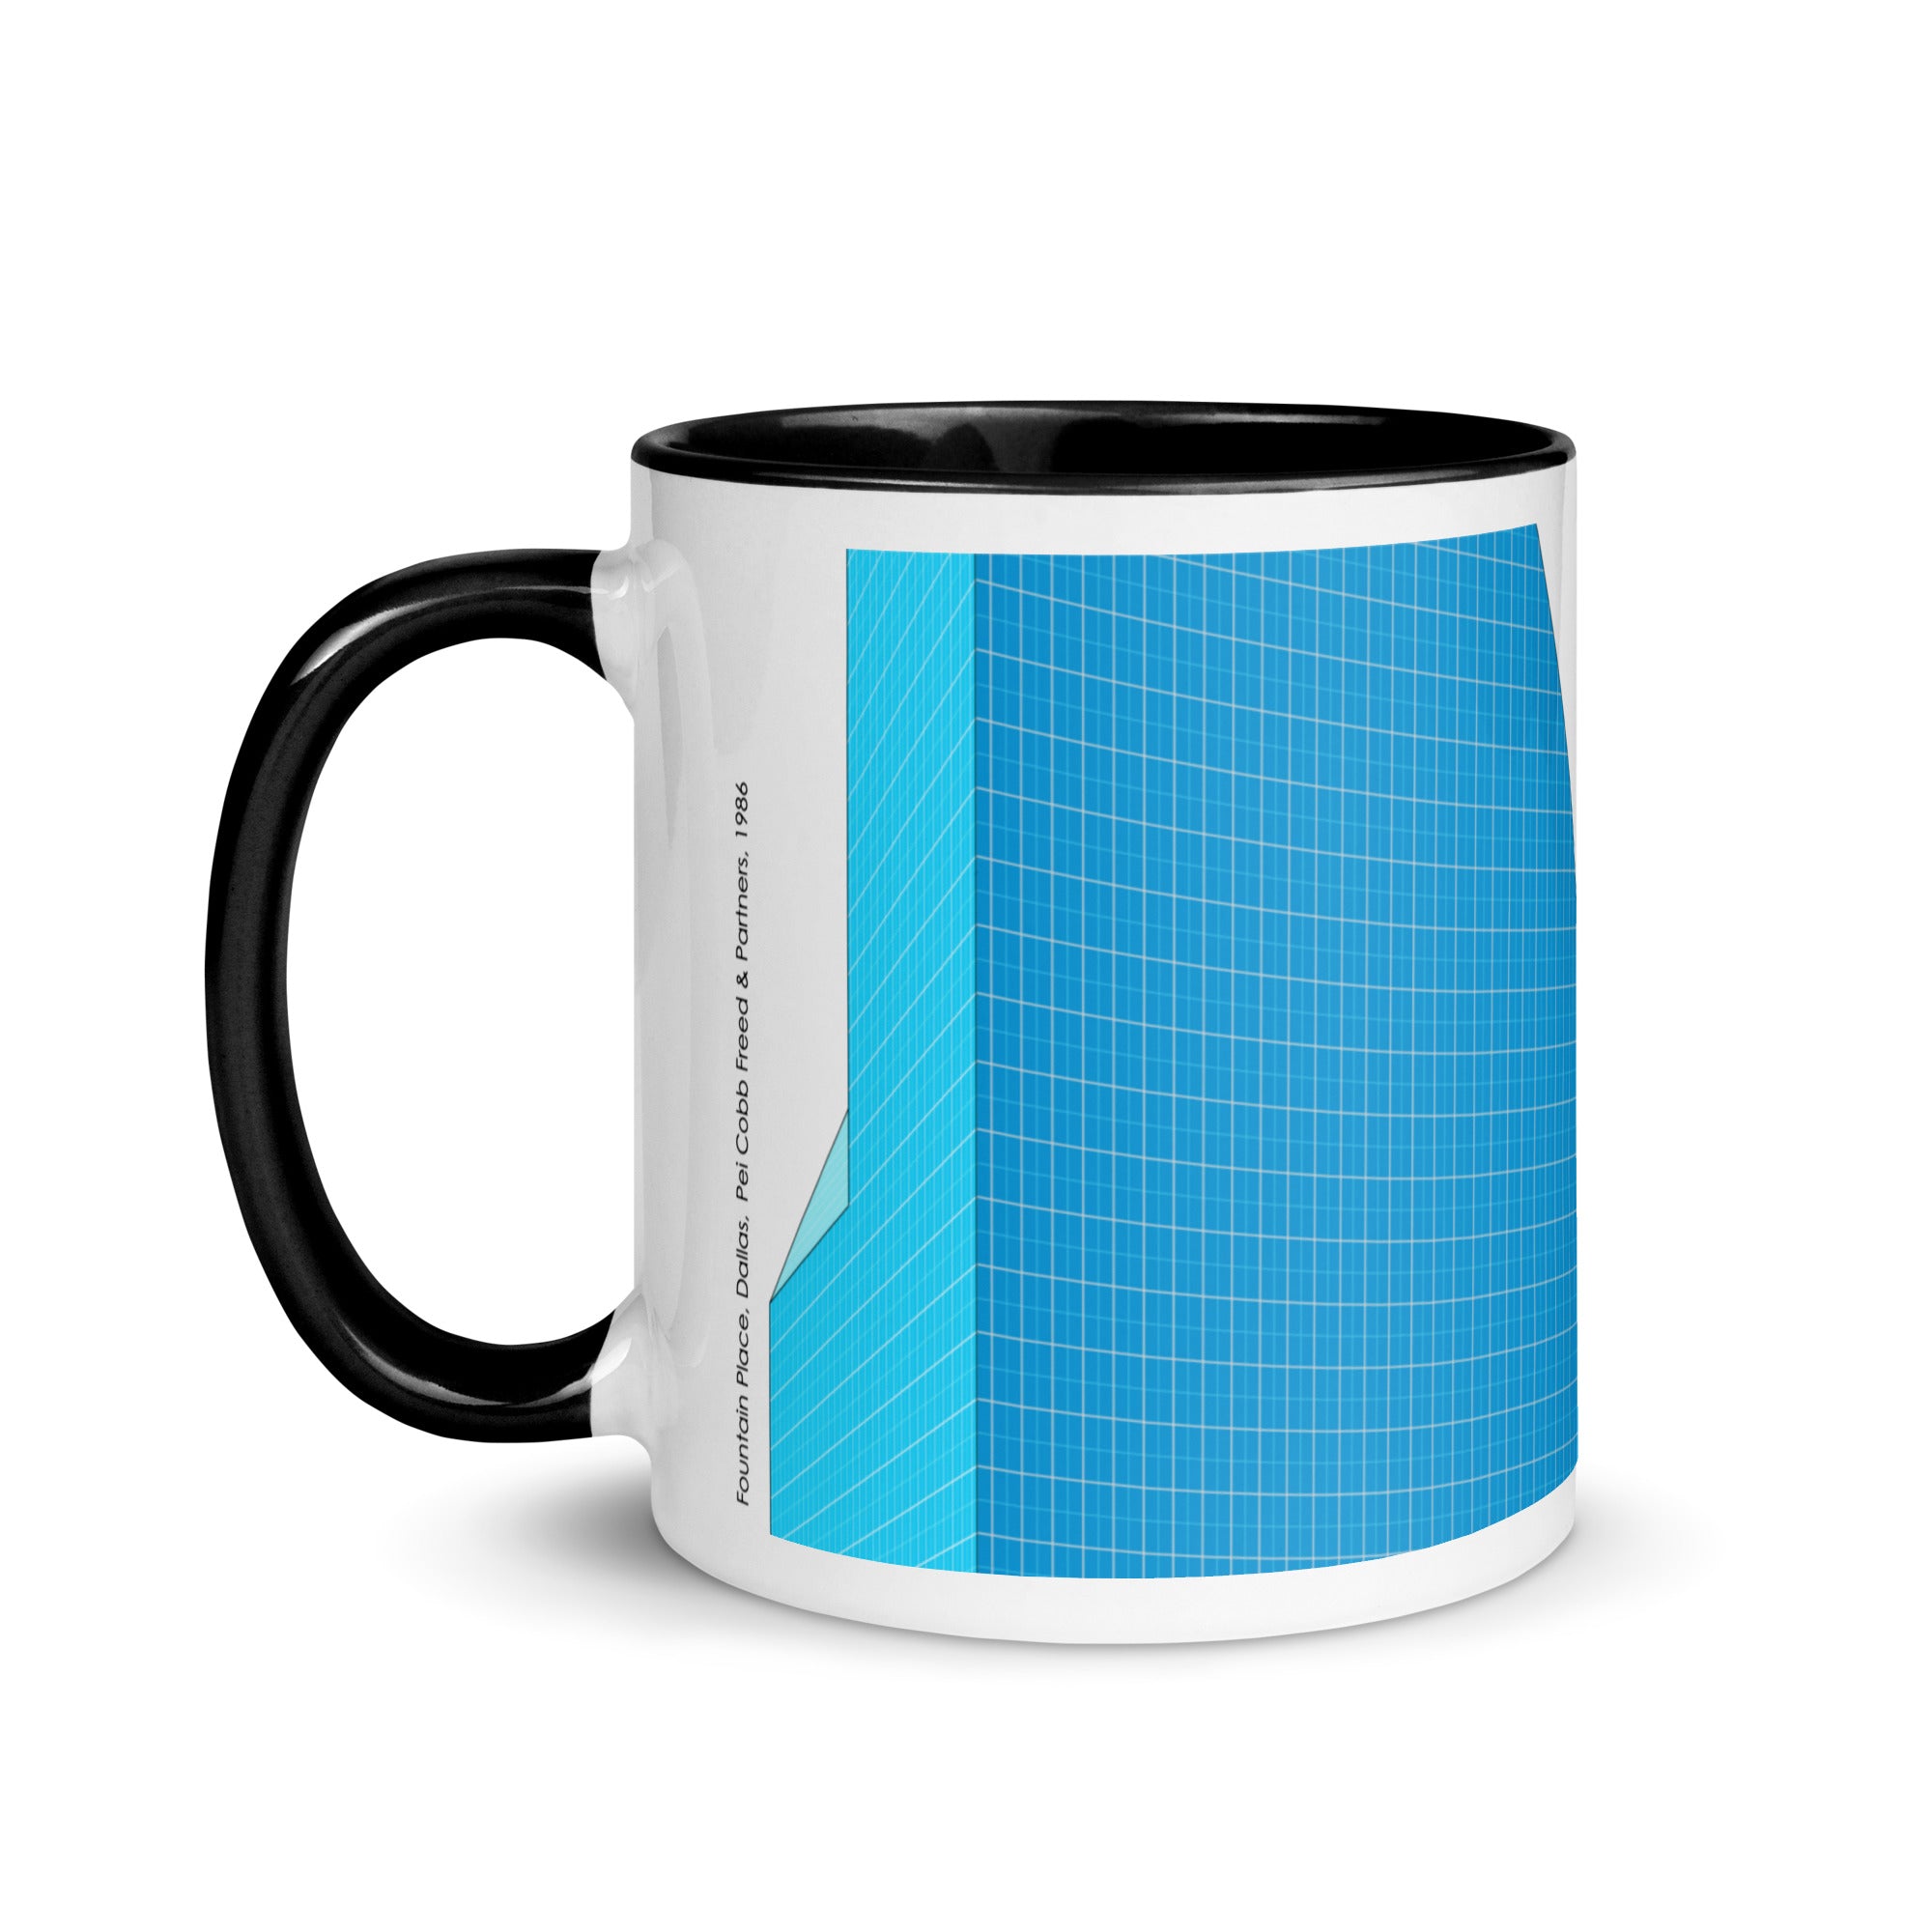 Fountain Place Mug with Colors Inside